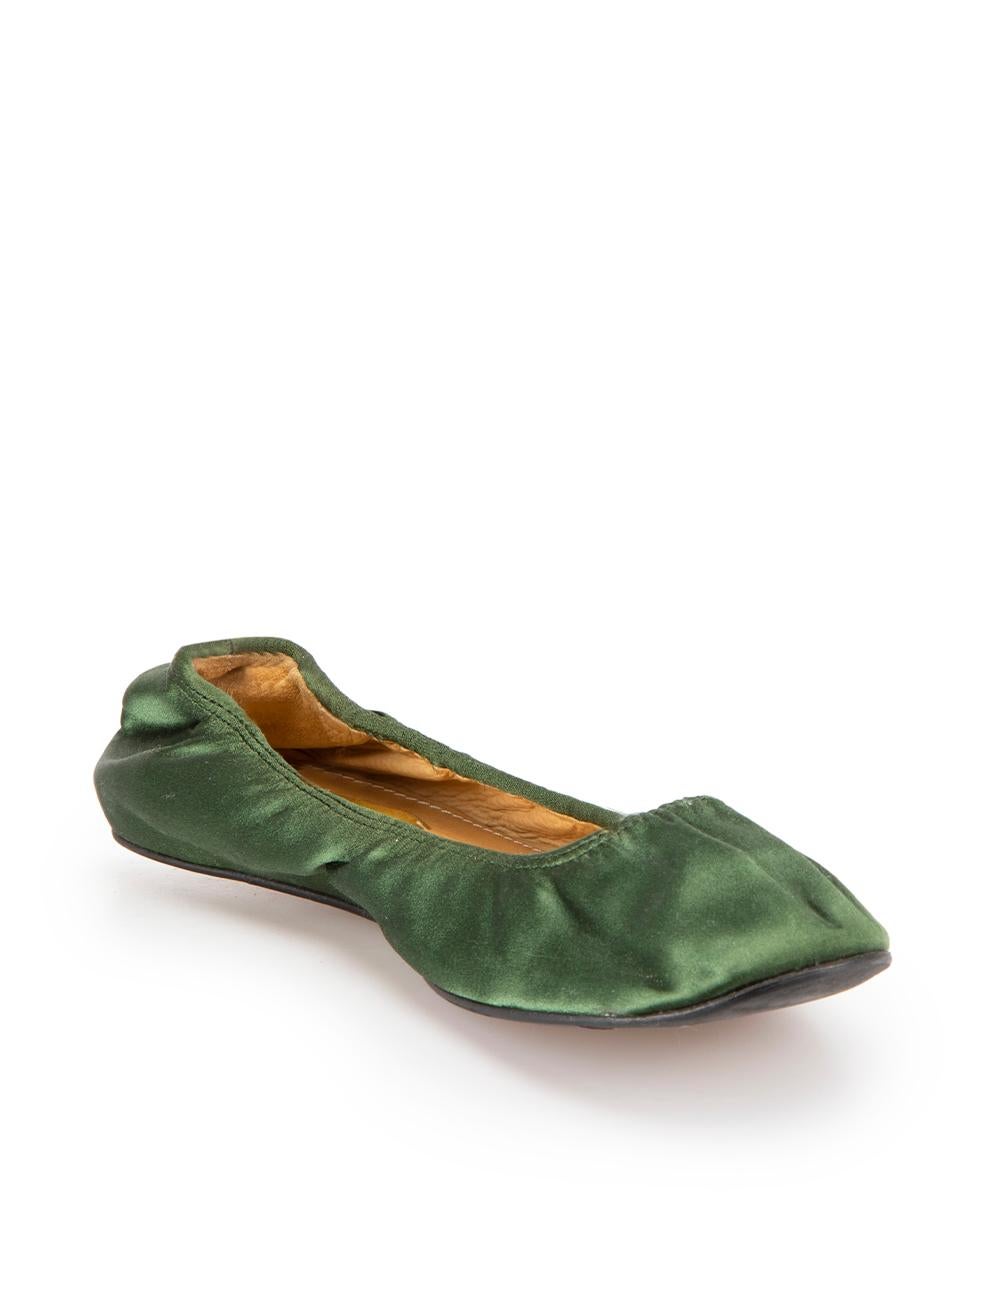 CONDITION is Very good. Minimal wear to flats is evident. Some scuffing and general wear to outsole on this used Lanvin designer resale item.



Details


Winter 2007

Green

Satin

Ballet